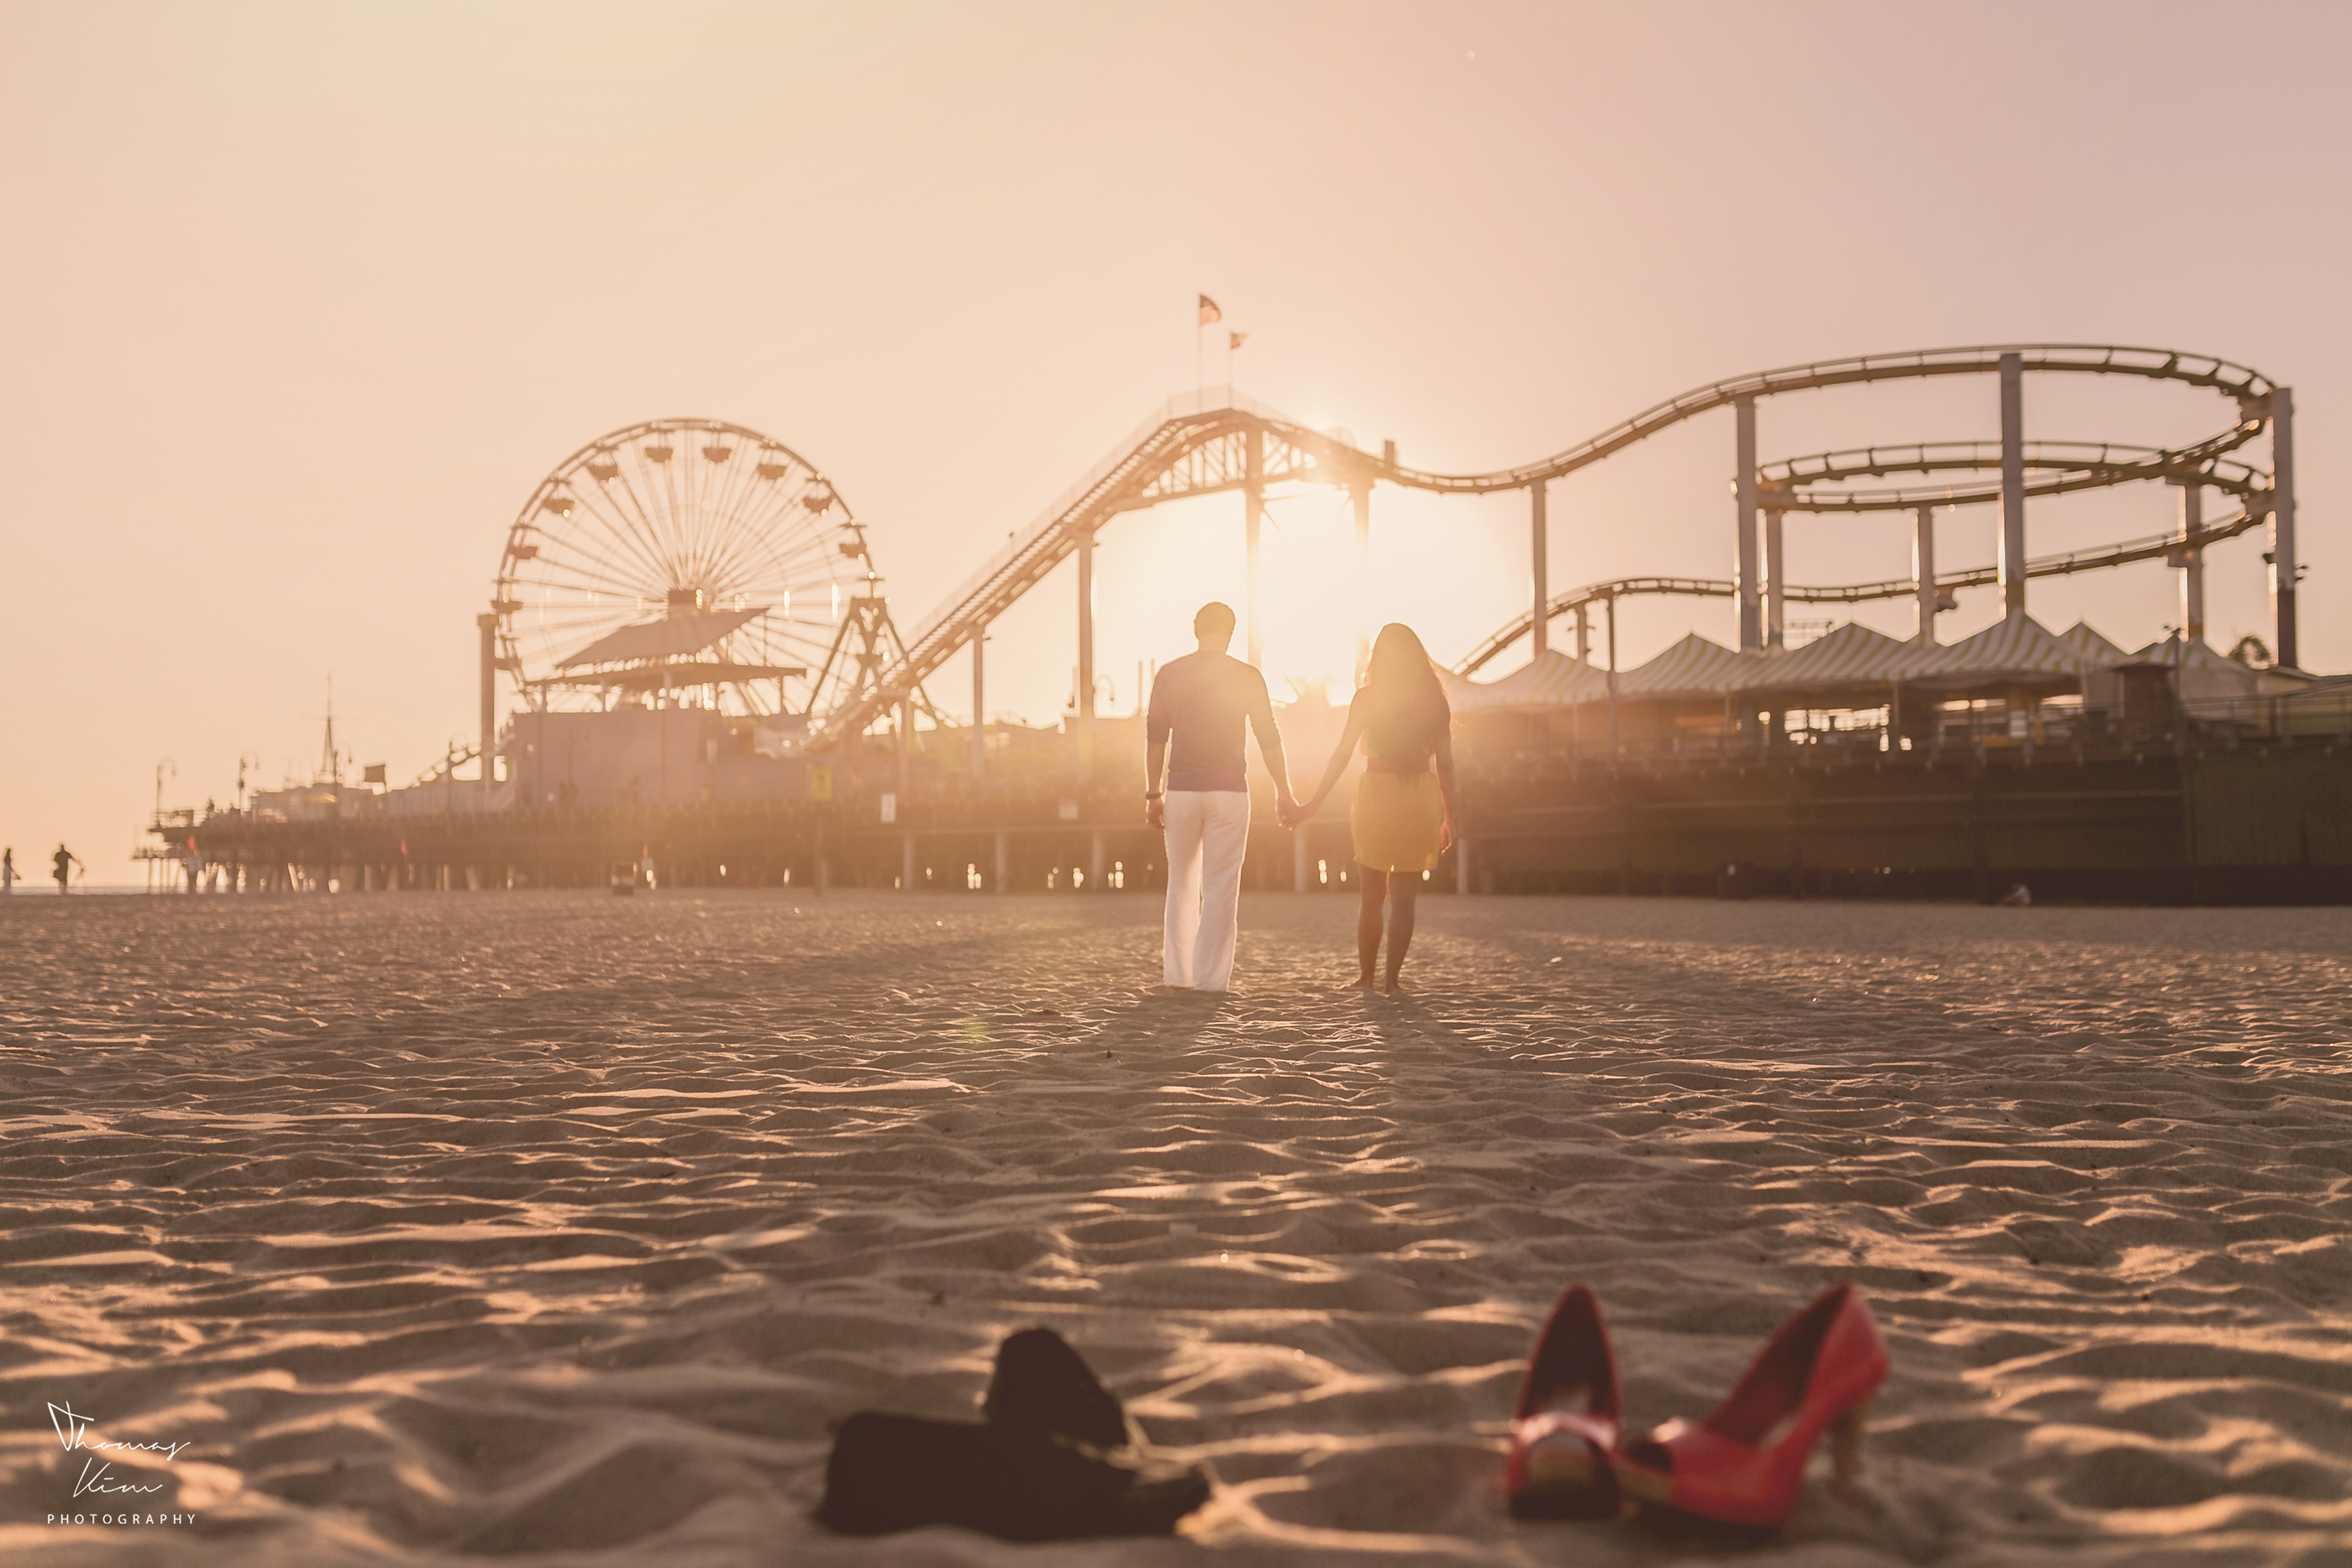 A couple getting married on a Los Angeles beach.